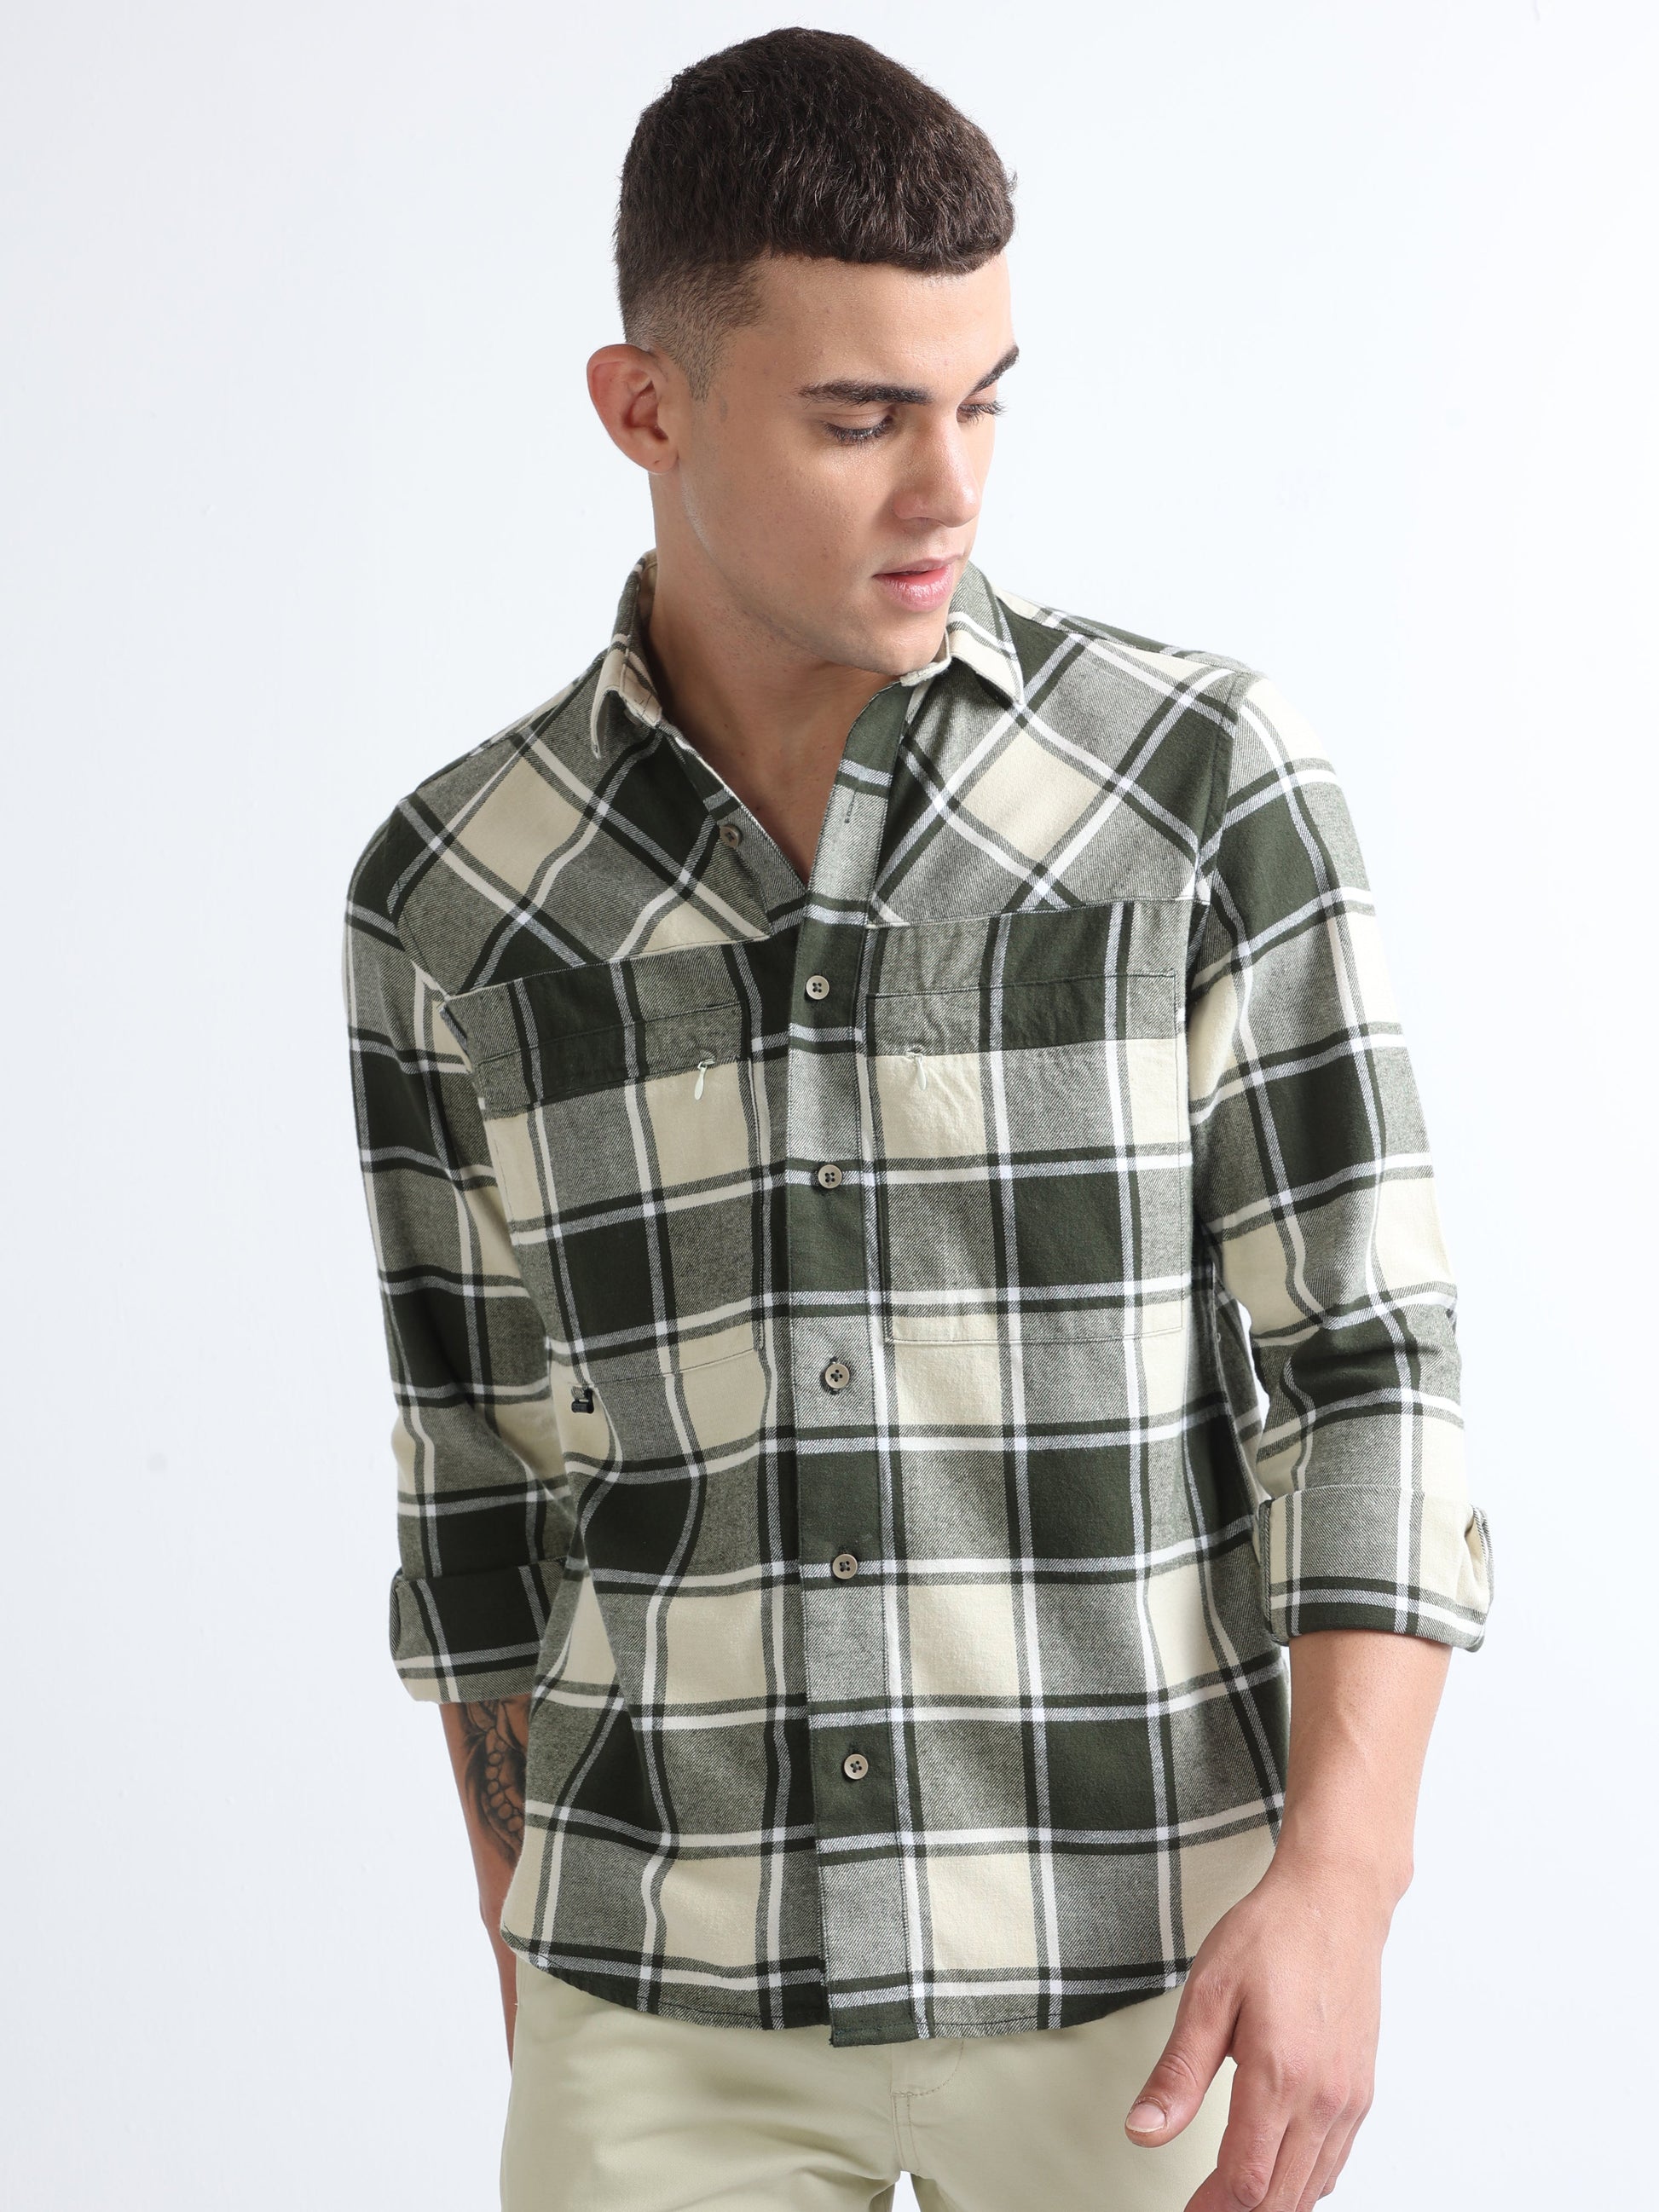 Buy Mens Double Pocket Twill Shirt Online.